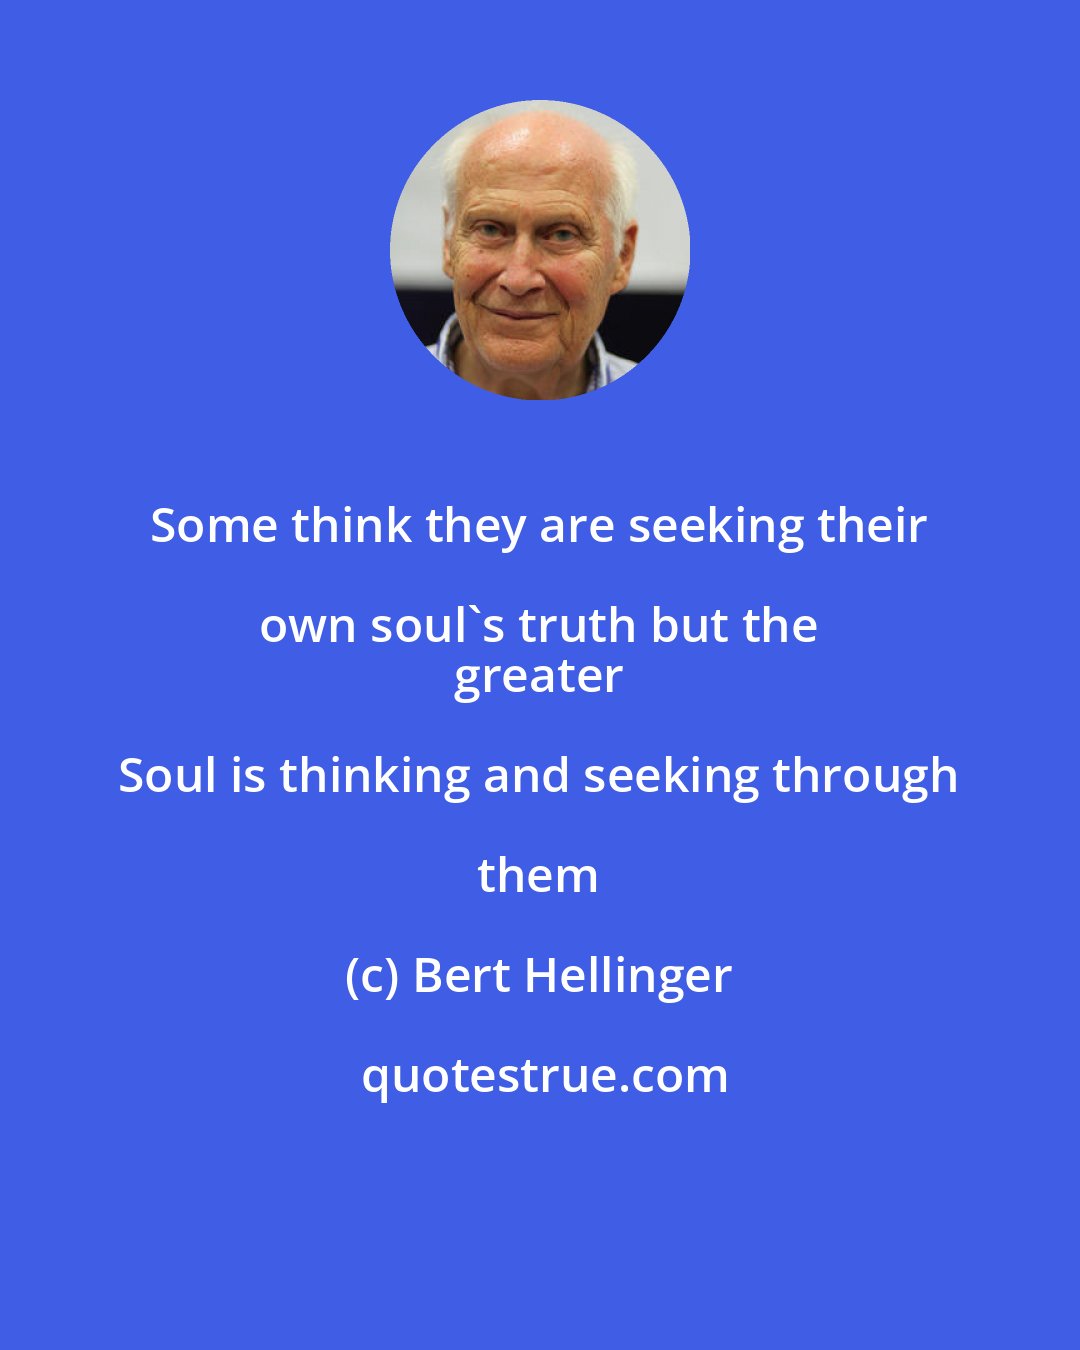 Bert Hellinger: Some think they are seeking their own soul's truth but the 
 greater Soul is thinking and seeking through them